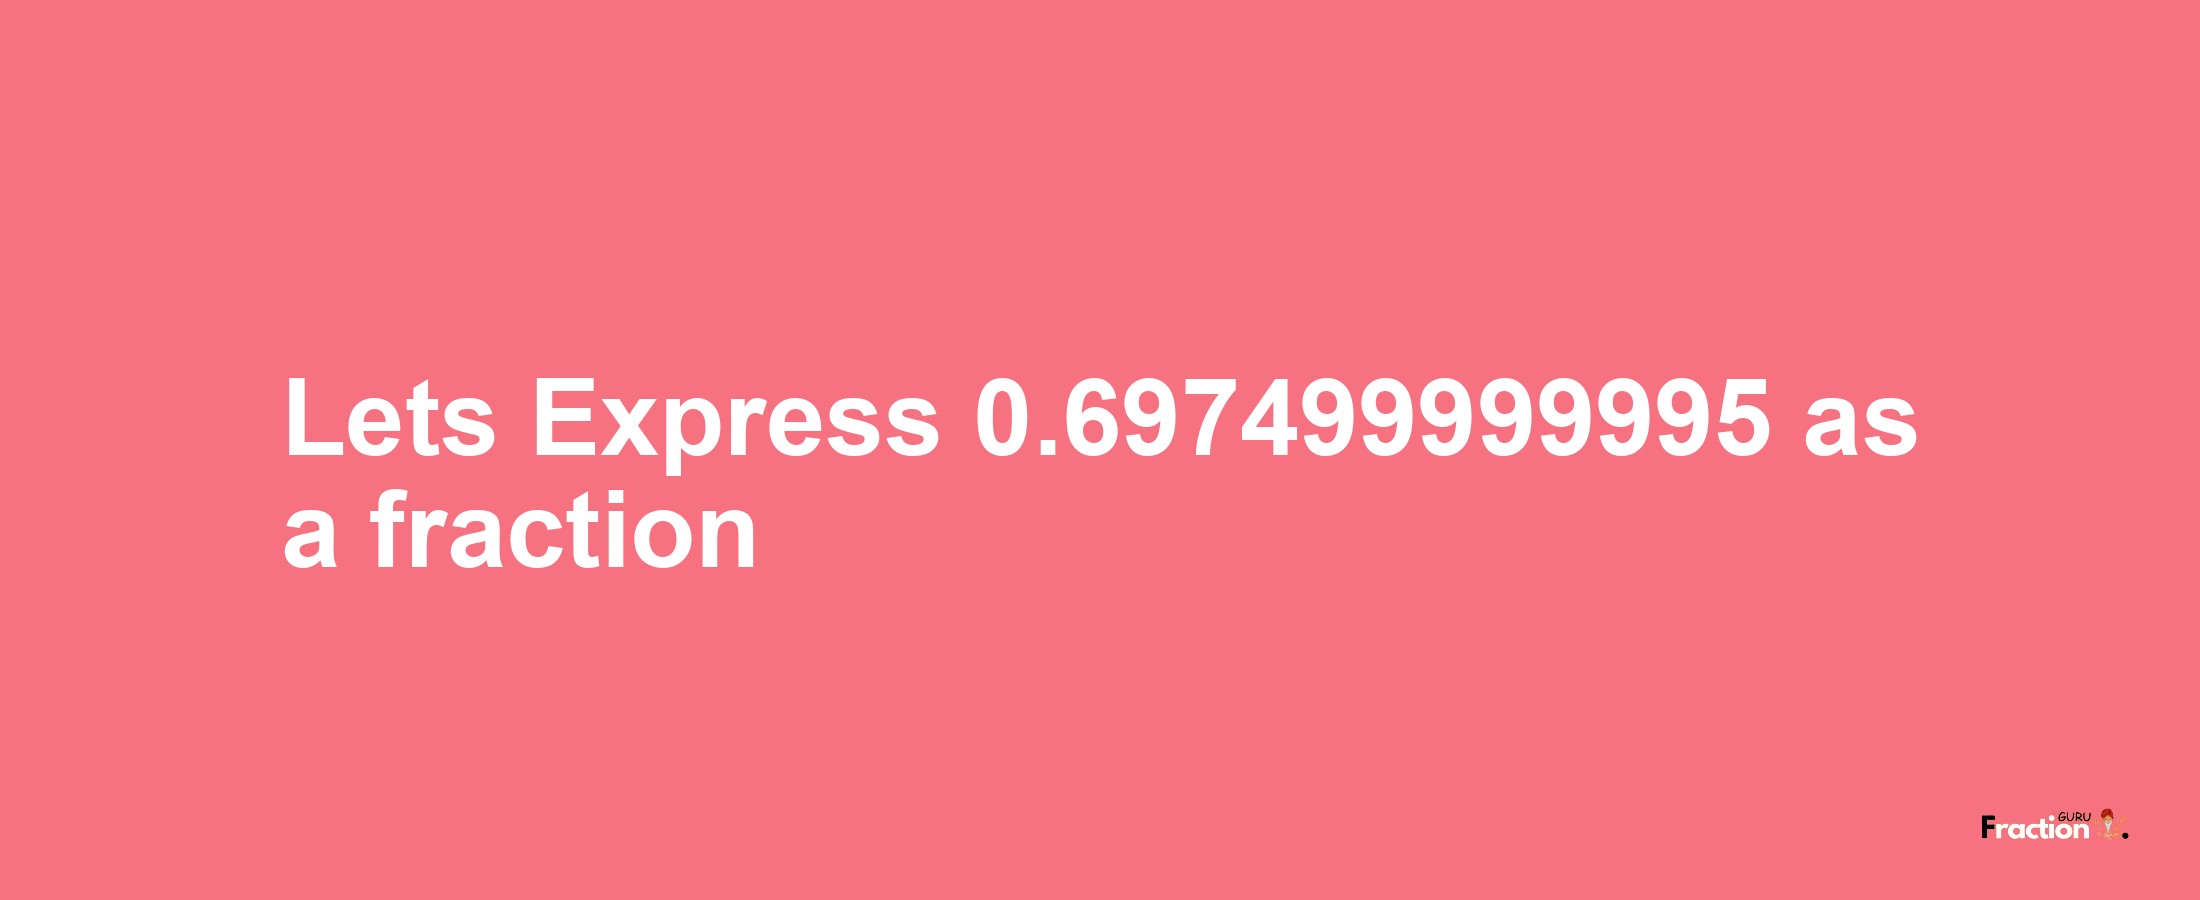 Lets Express 0.697499999995 as afraction